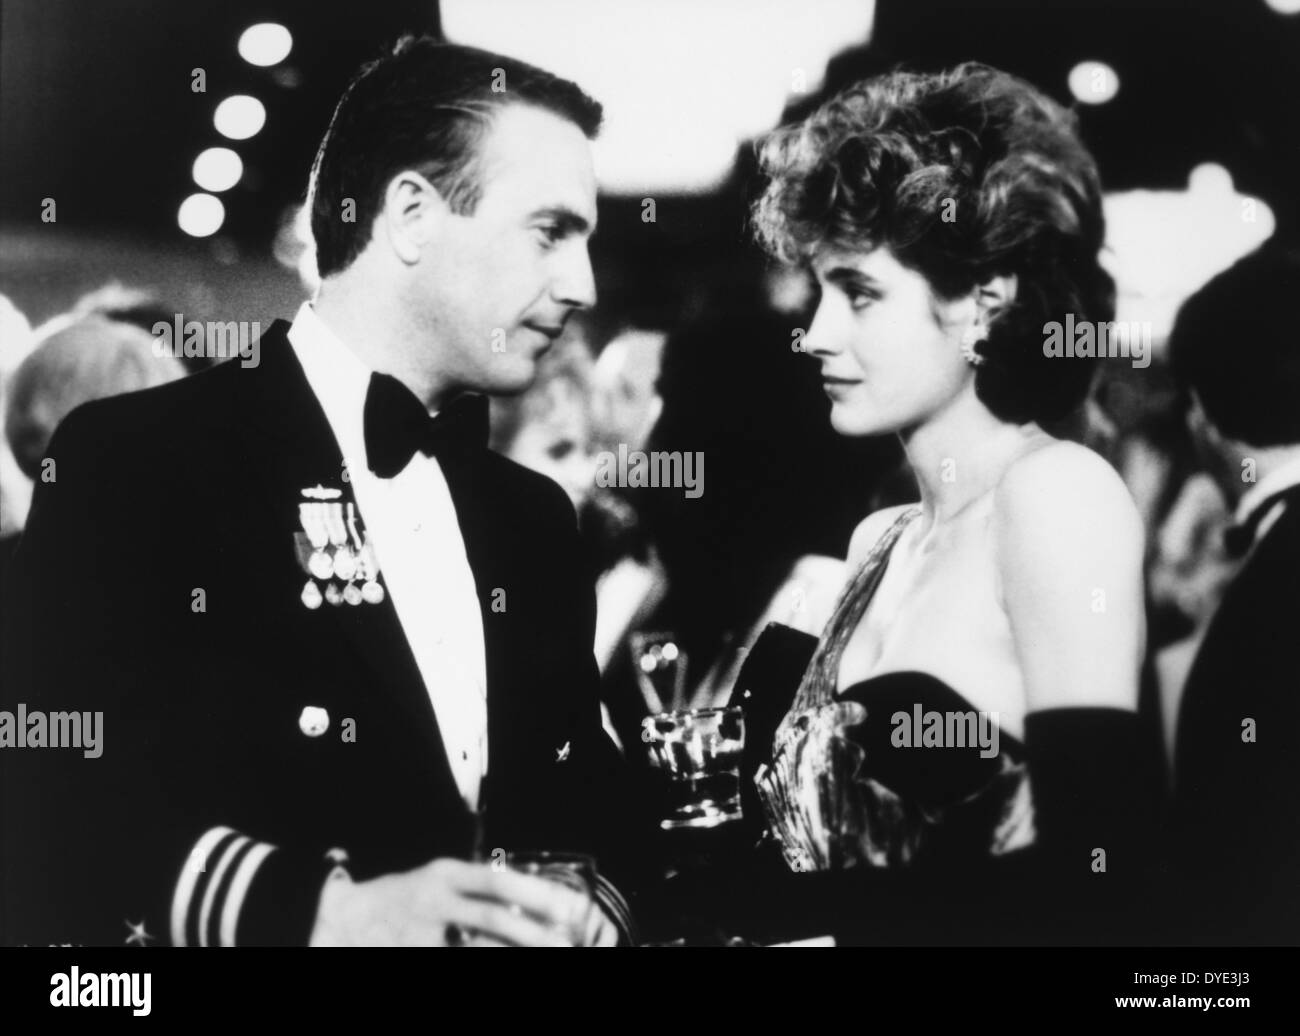 Sean Young und Kevin Costner, am Set des Films, "No Way Out", 1986 Stockfoto